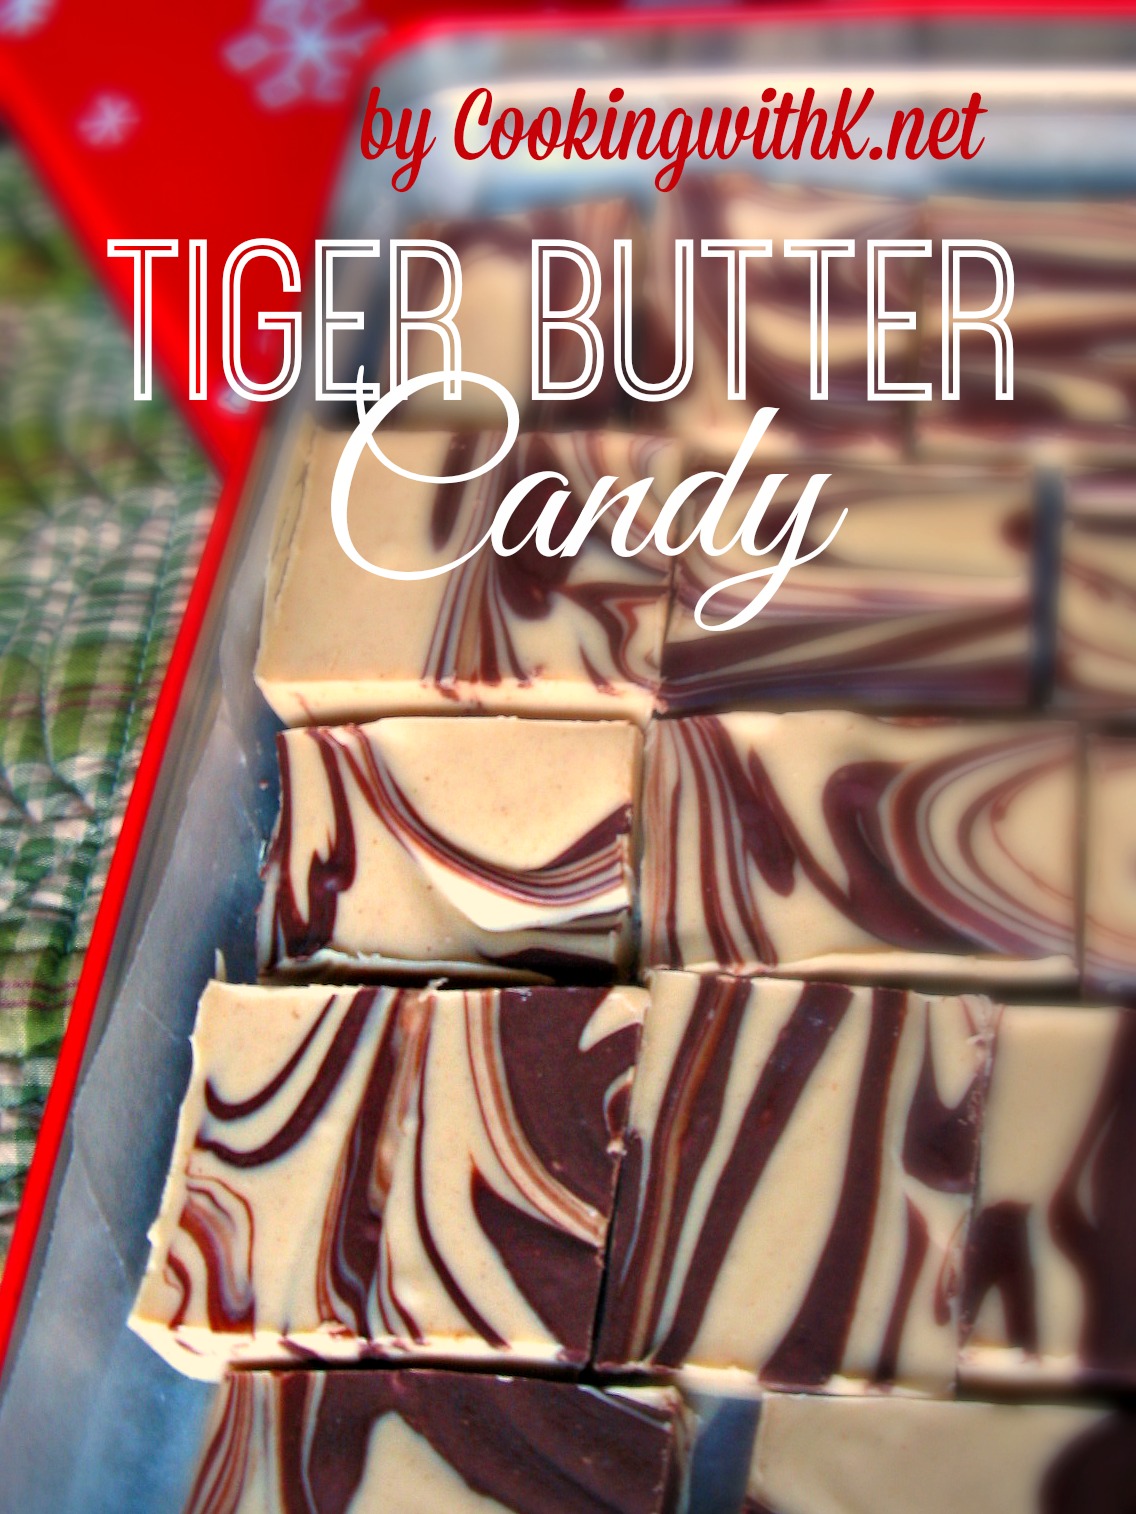 TIGER BUTTER FUDGE - Butter with a Side of Bread